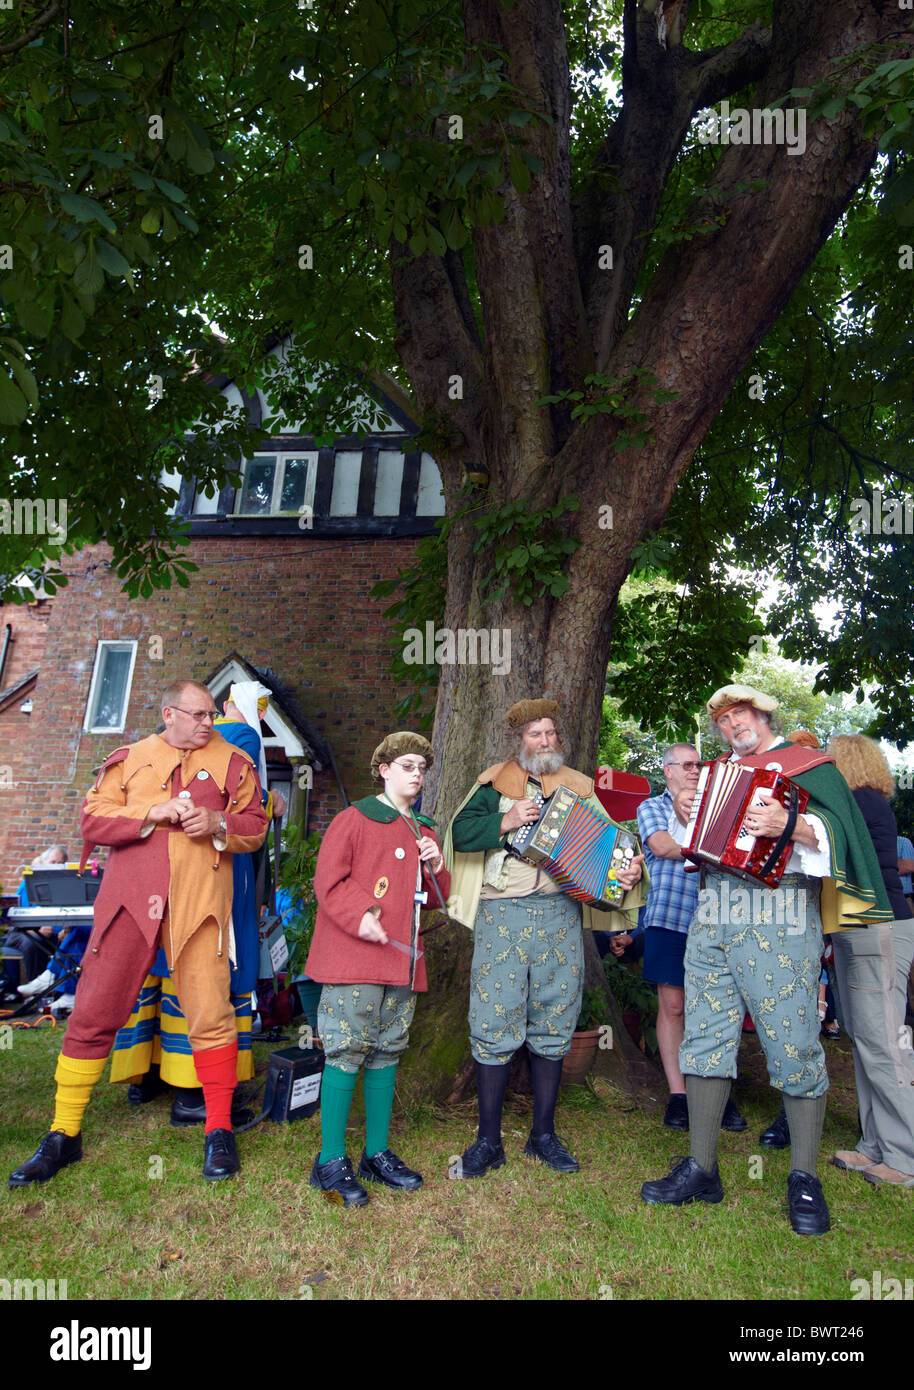 Accordion Players At The Abbots Bromley Horn Dance Staffordshire UK Europe Stock Photo